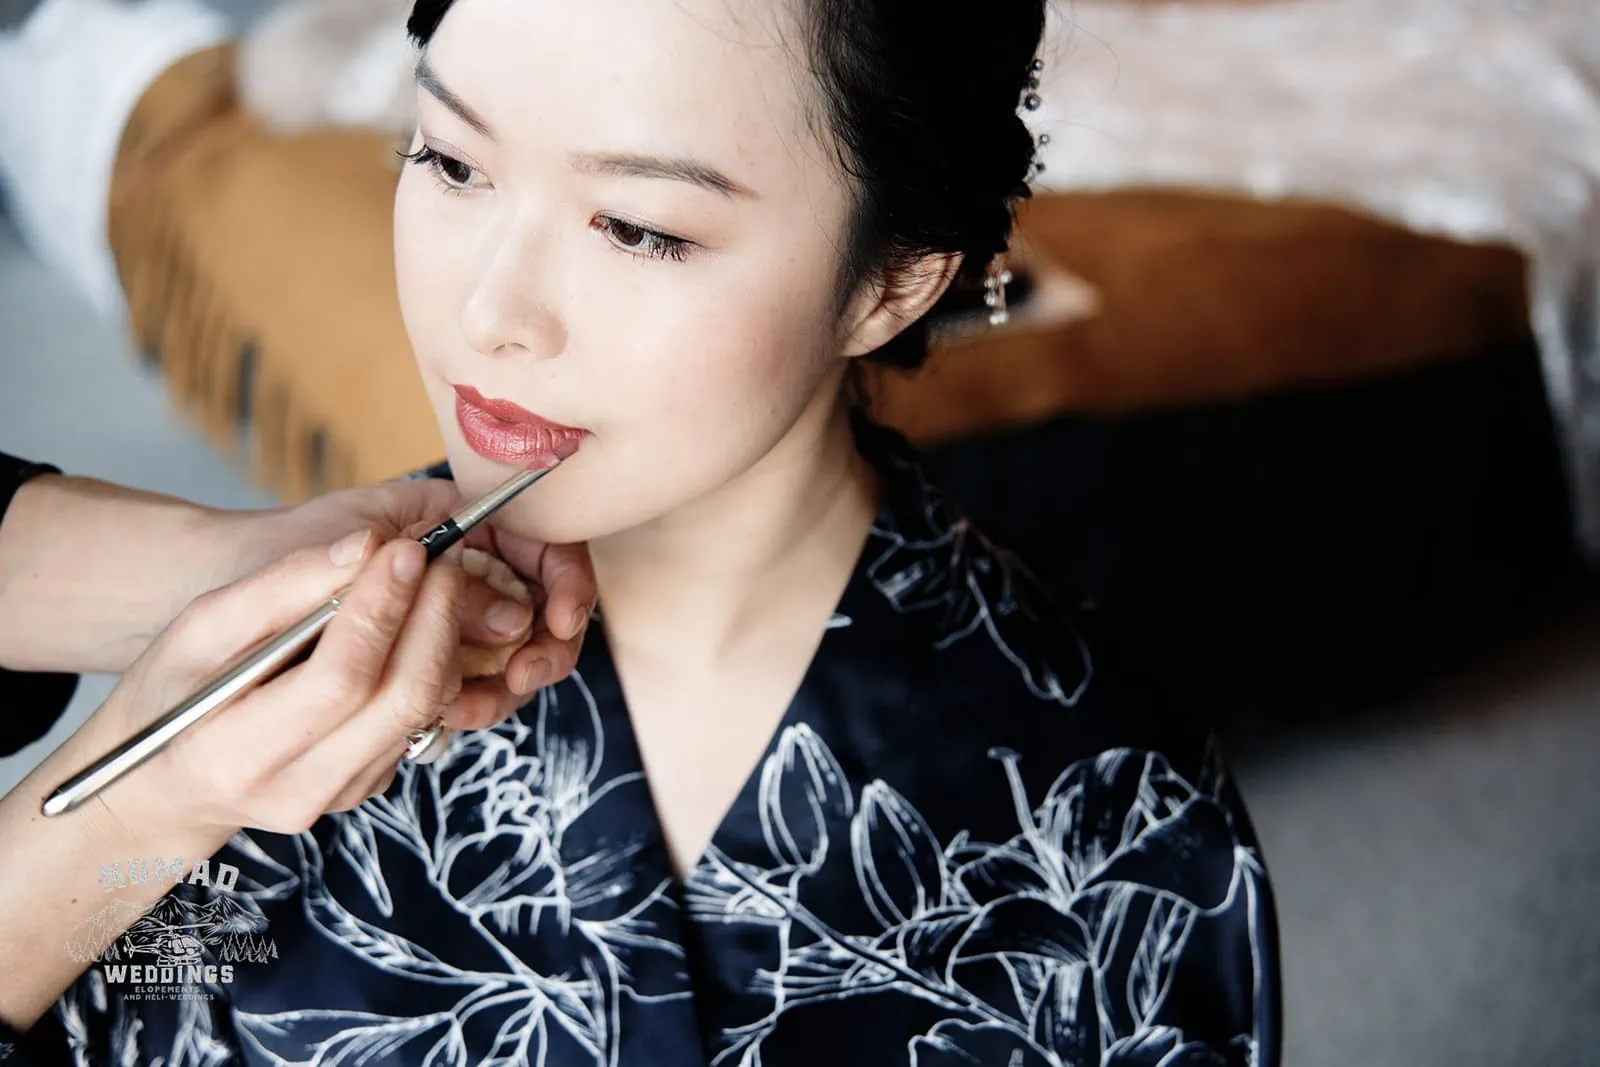 Joanna getting her makeup done in a kimono during their pre-wedding shoot in Queenstown, New Zealand.